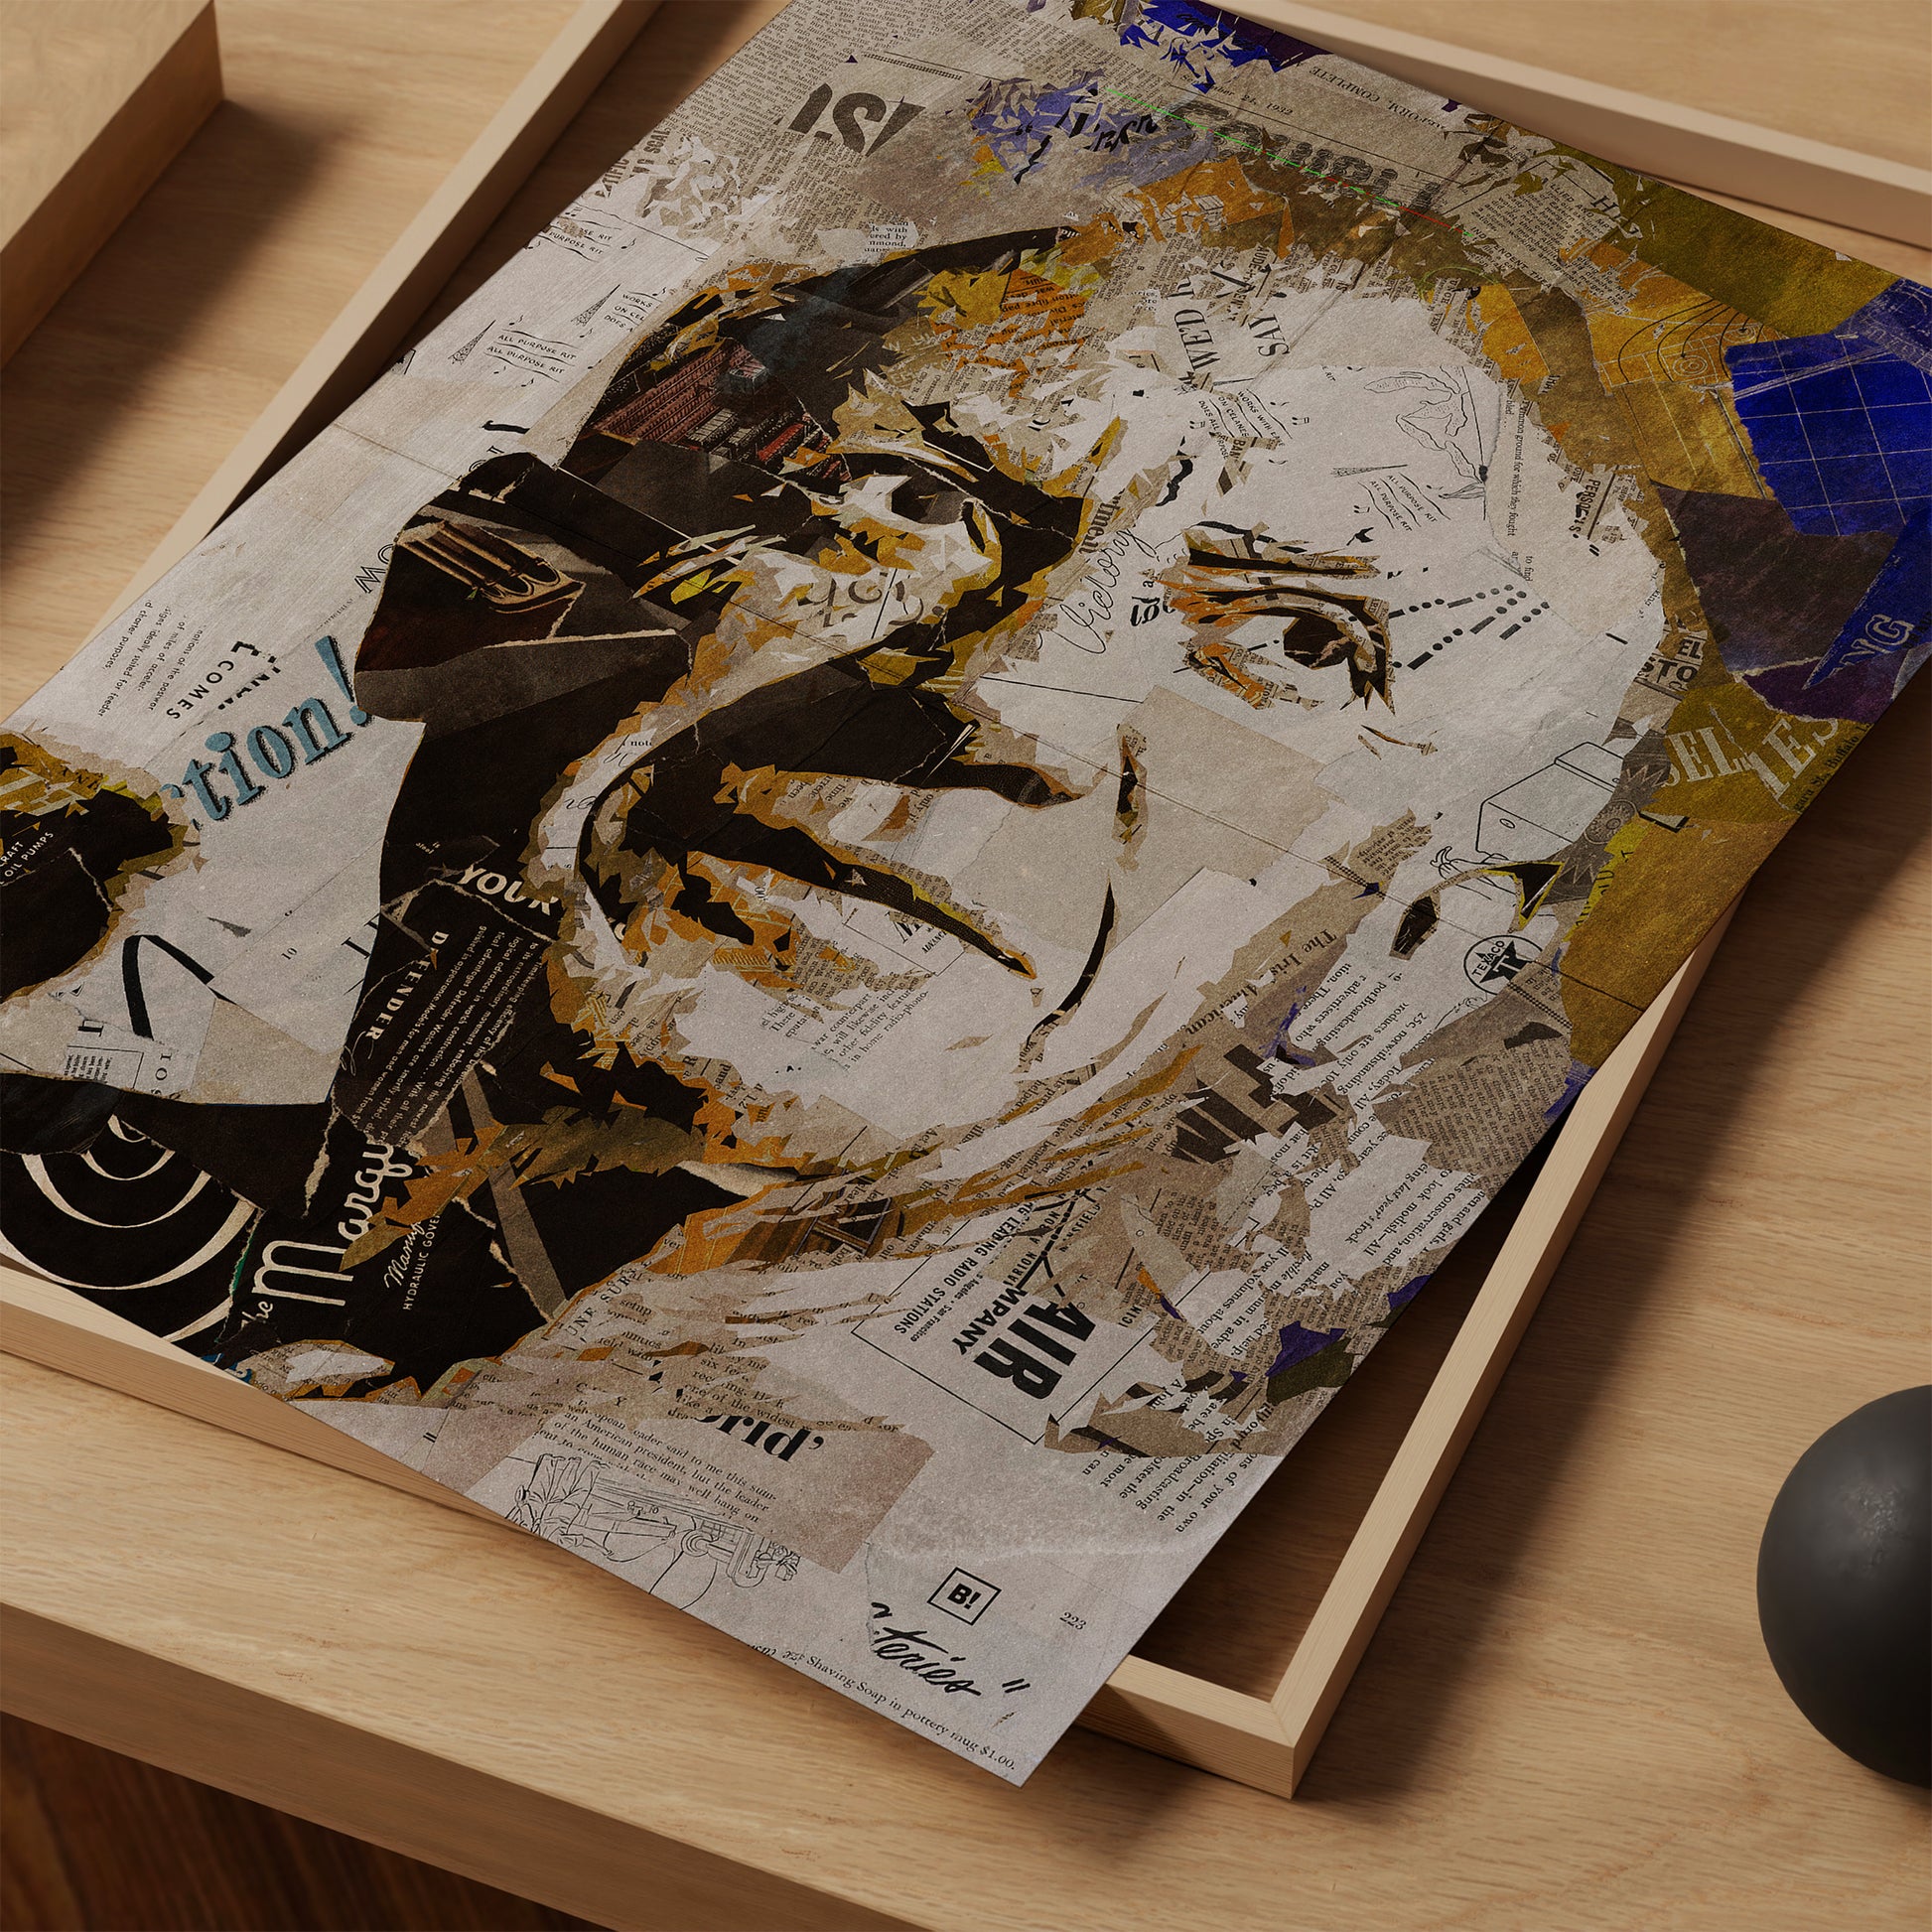 Be inspired by our iconic collage portrait art print of Pablo Picasso. This artwork was printed using the giclée process on archival acid-free paper and is presented as a print close-up, capturing its timeless beauty in every detail.